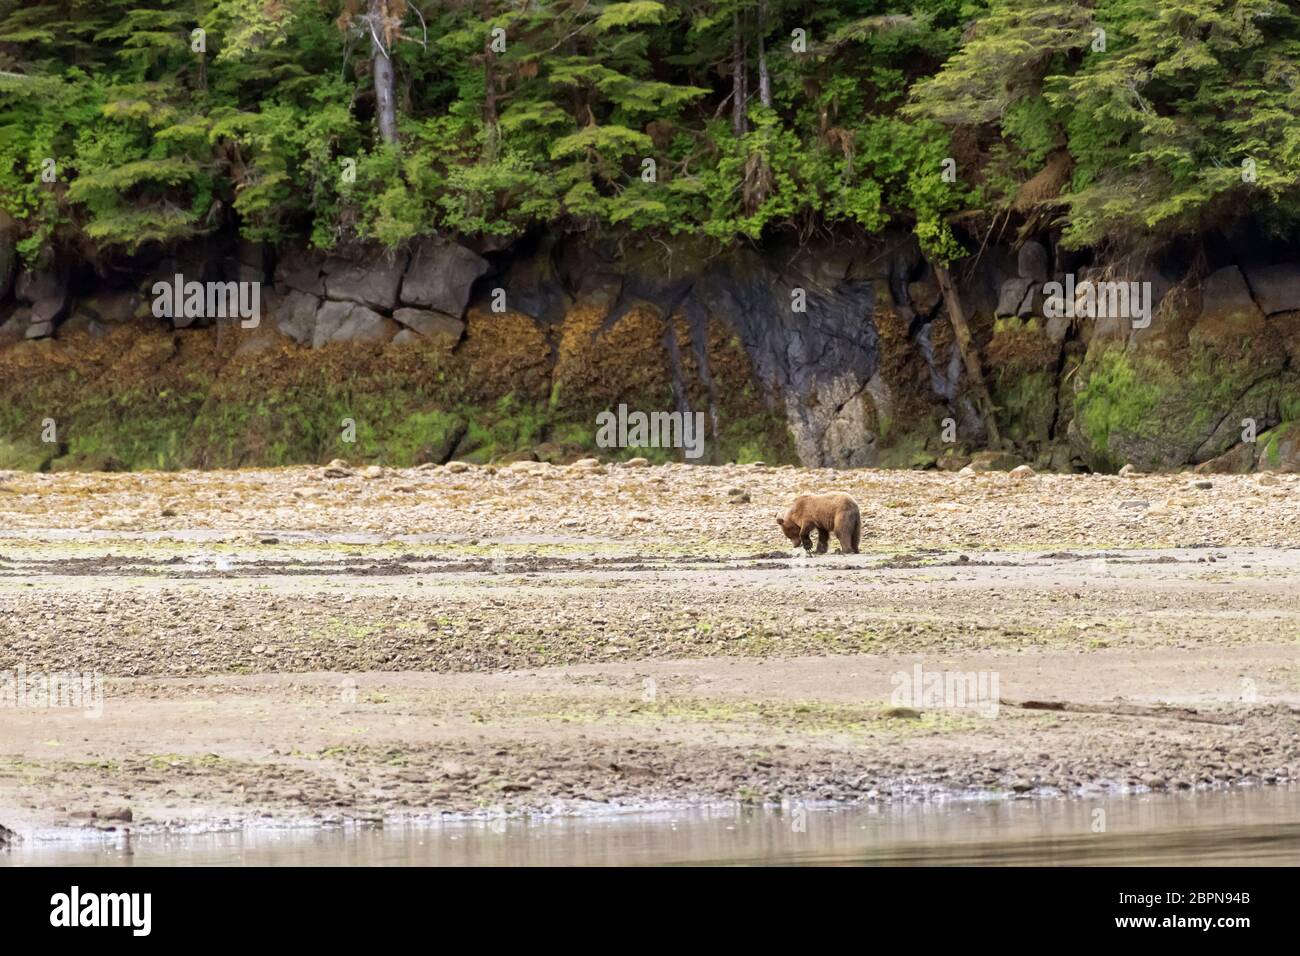 Young grizzly bear digging for clams at low tide, Khutzeymateen Grizzly Bear Sanctuary, BC Stock Photo